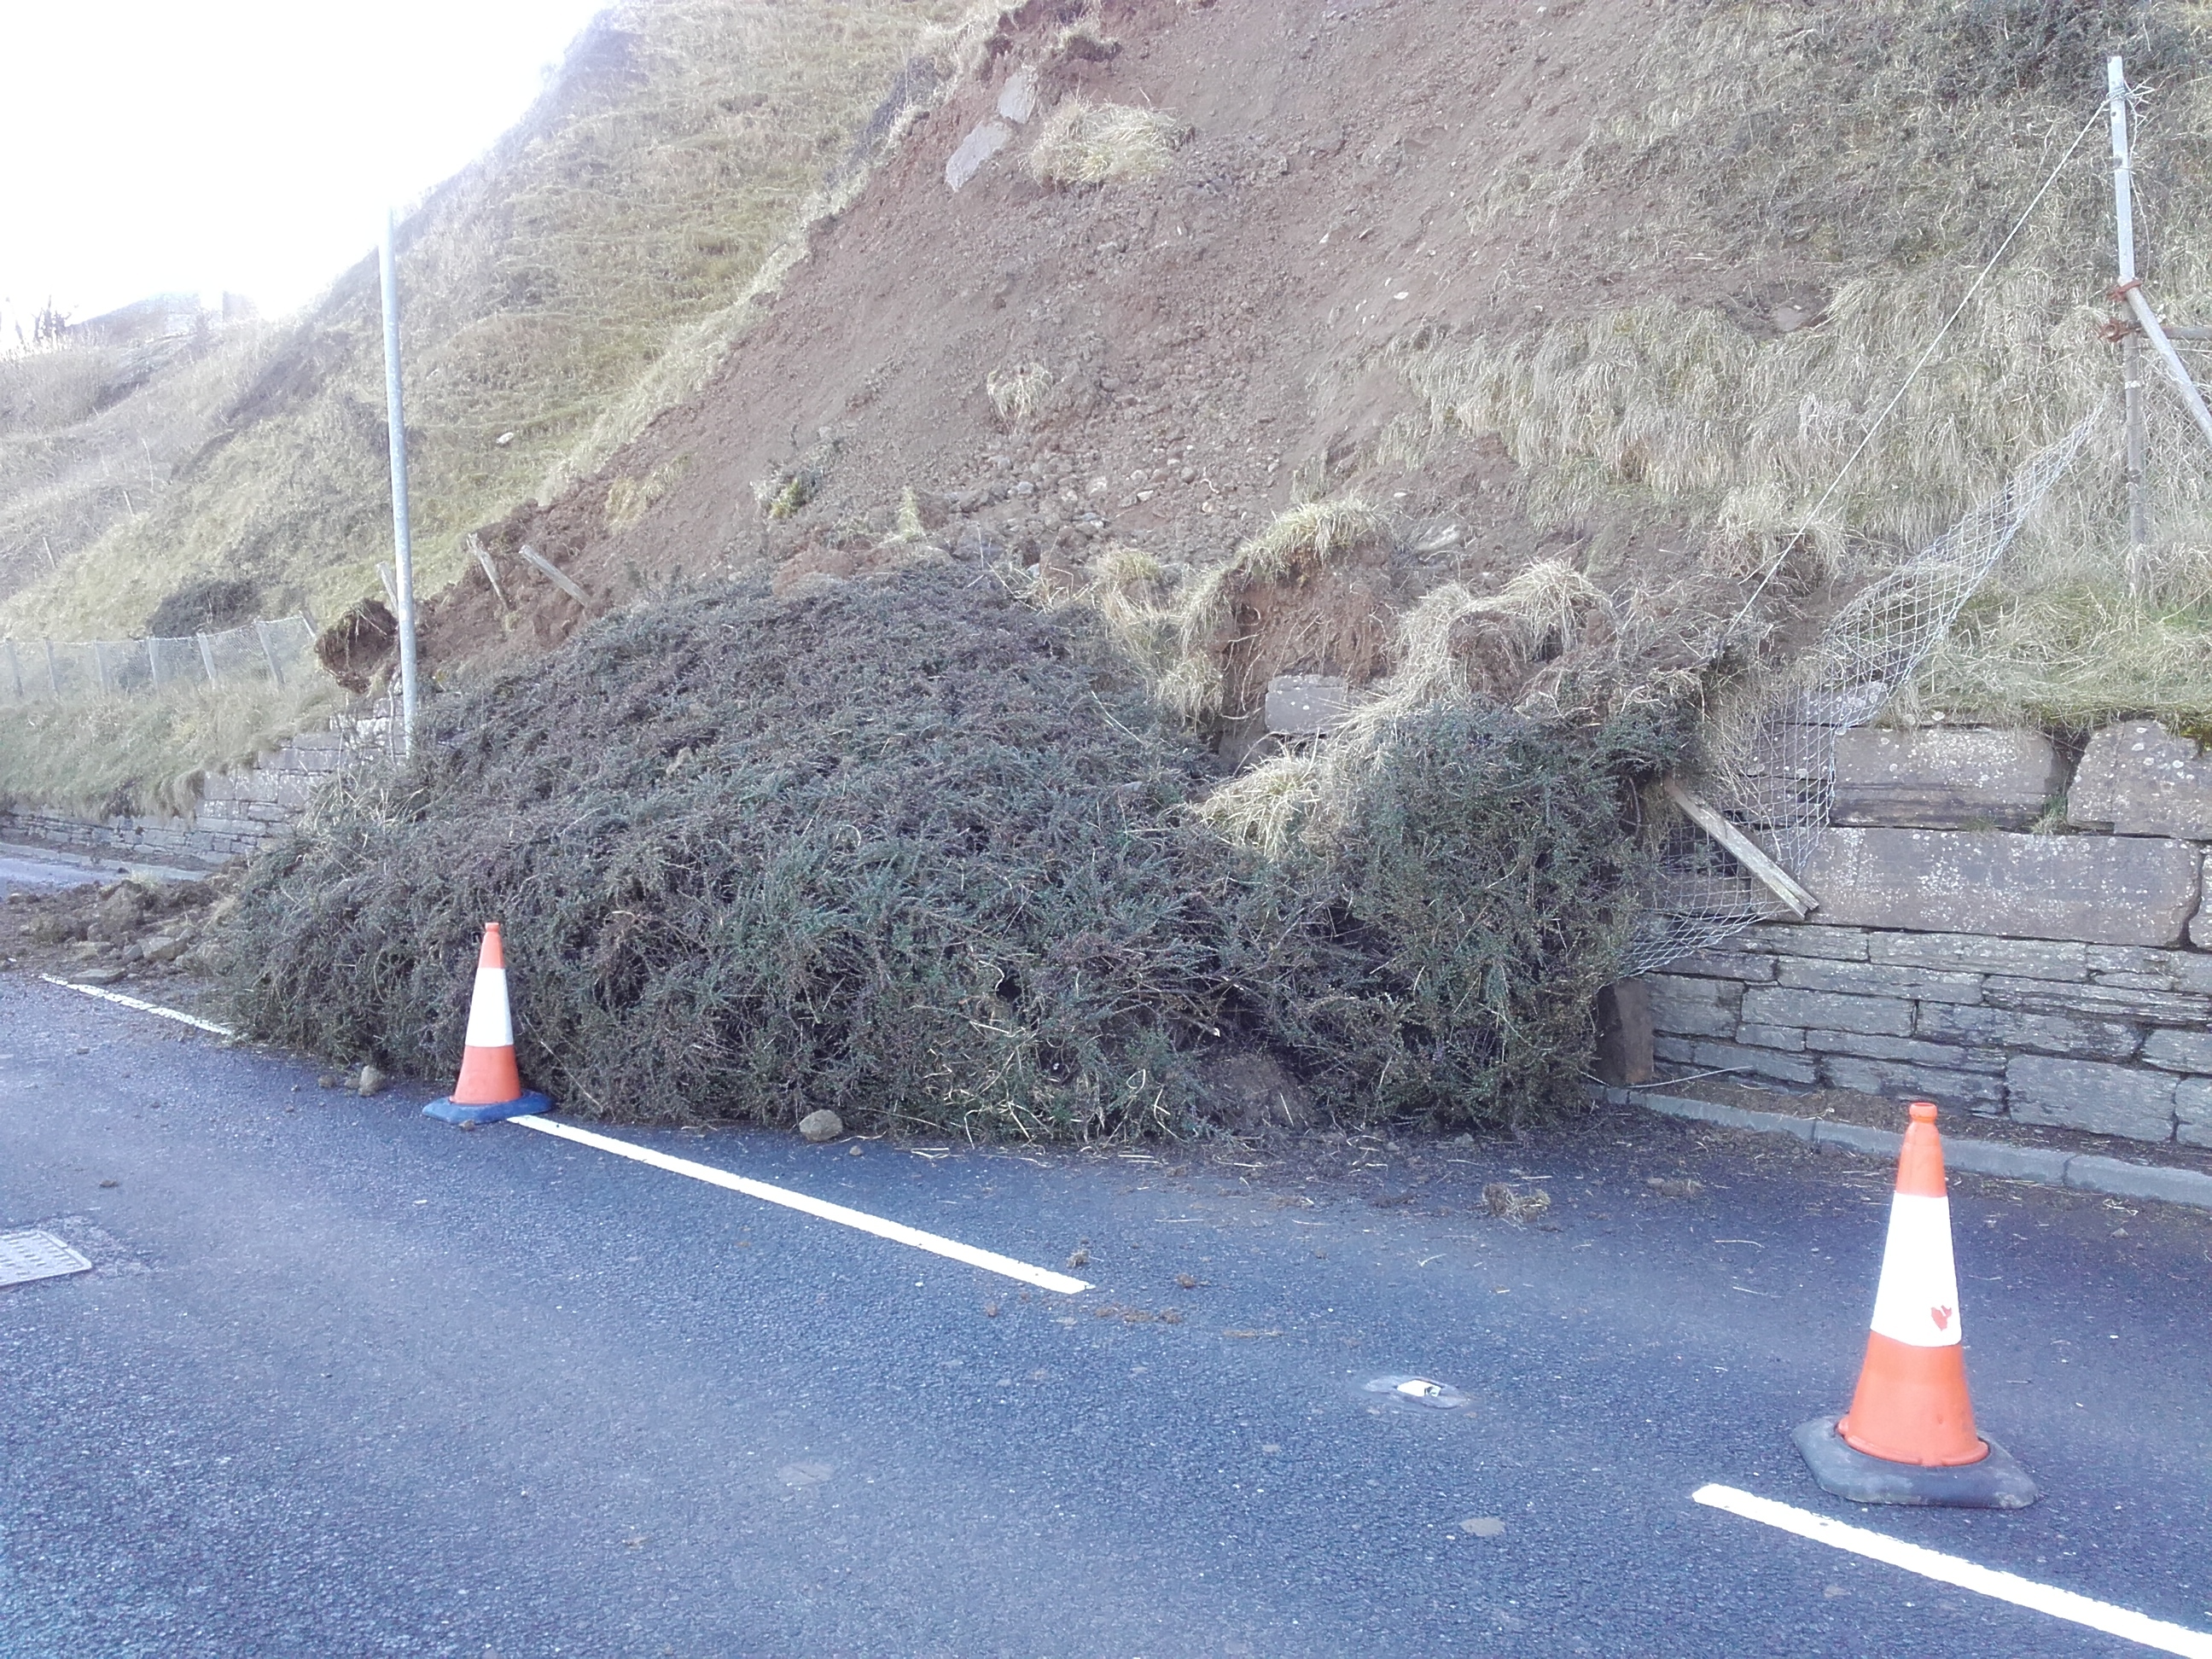 Debris on the A9 prior to the clear-up